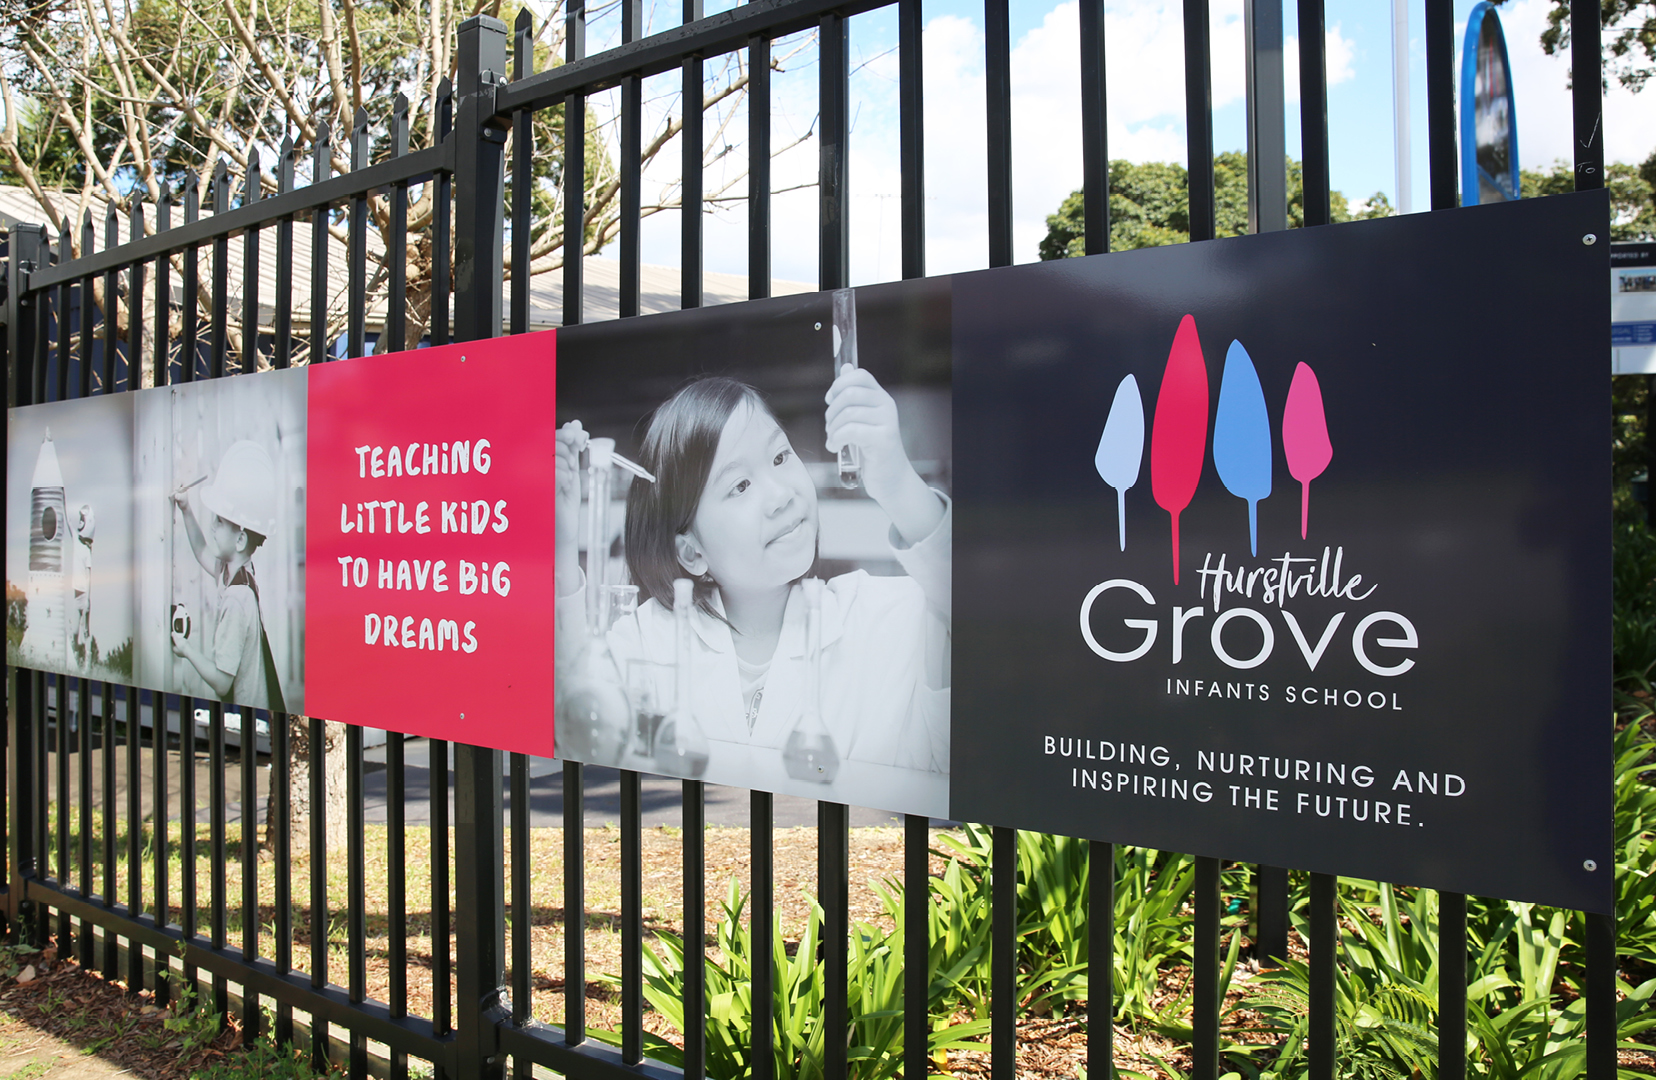 Out of the Woods Creative Hurstville Grove Infants School